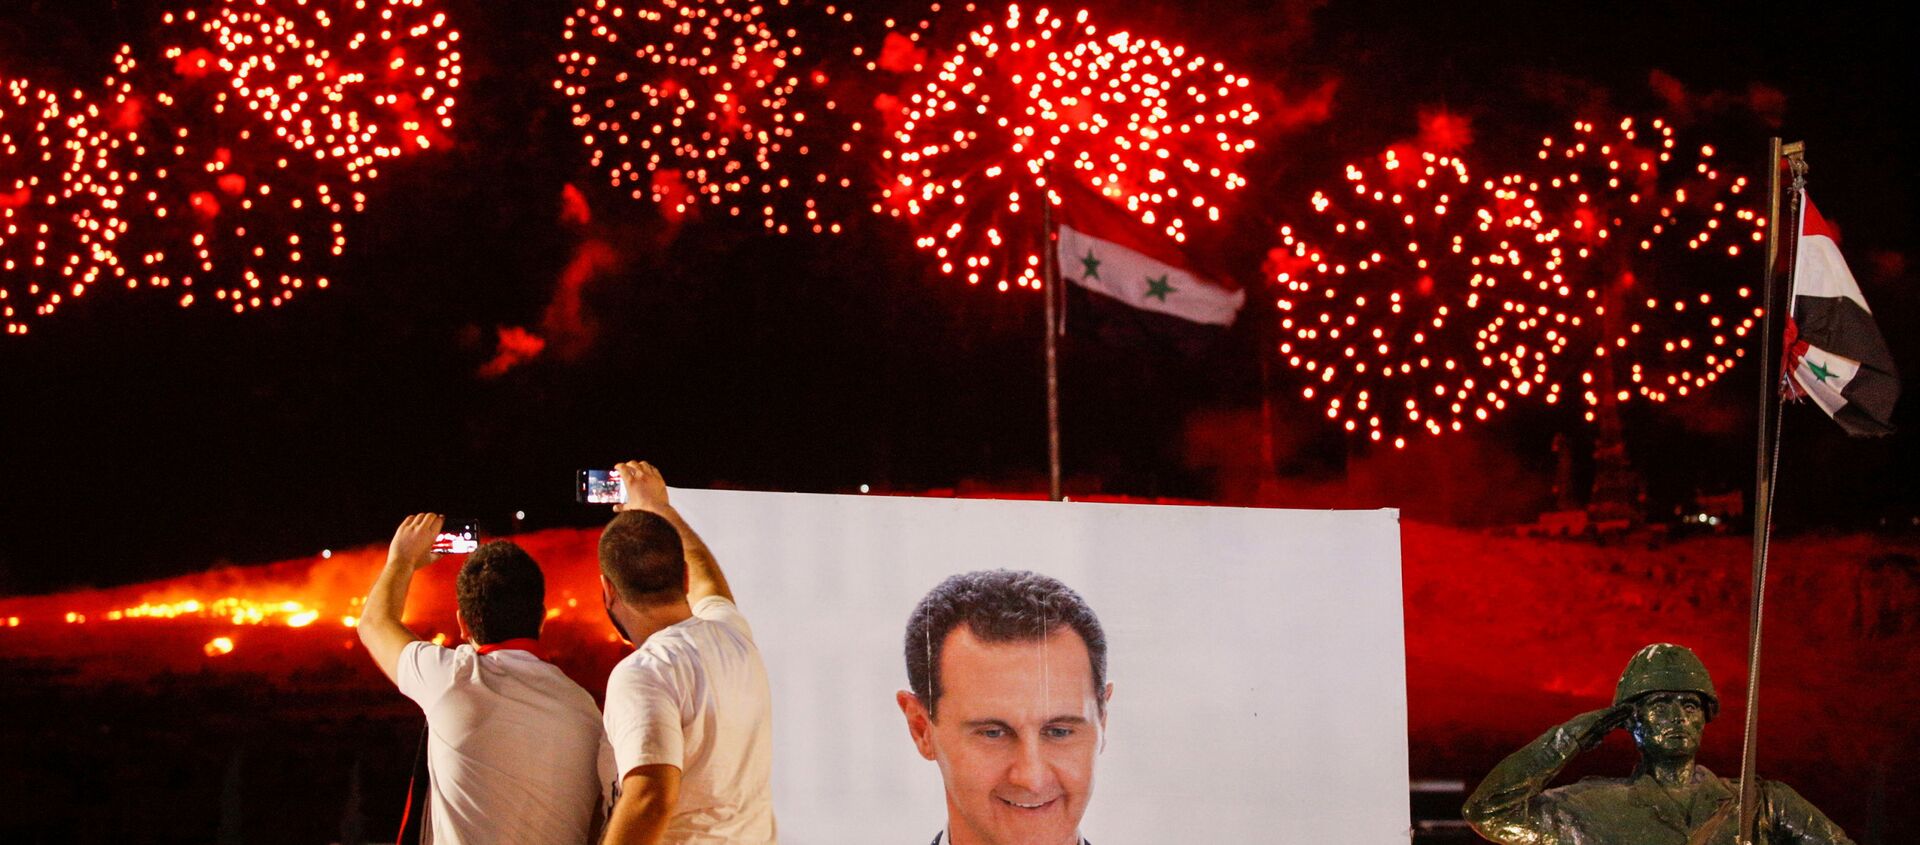 A poster depicting Syria’s president Bashar al- Assad is seen as supporters of of Syria's President Bashar al-Assad celebrate after the results of the presidential election announced that he won a fourth term in office, in Damascus, Syria, May 27, 2021. - Sputnik International, 1920, 27.05.2021